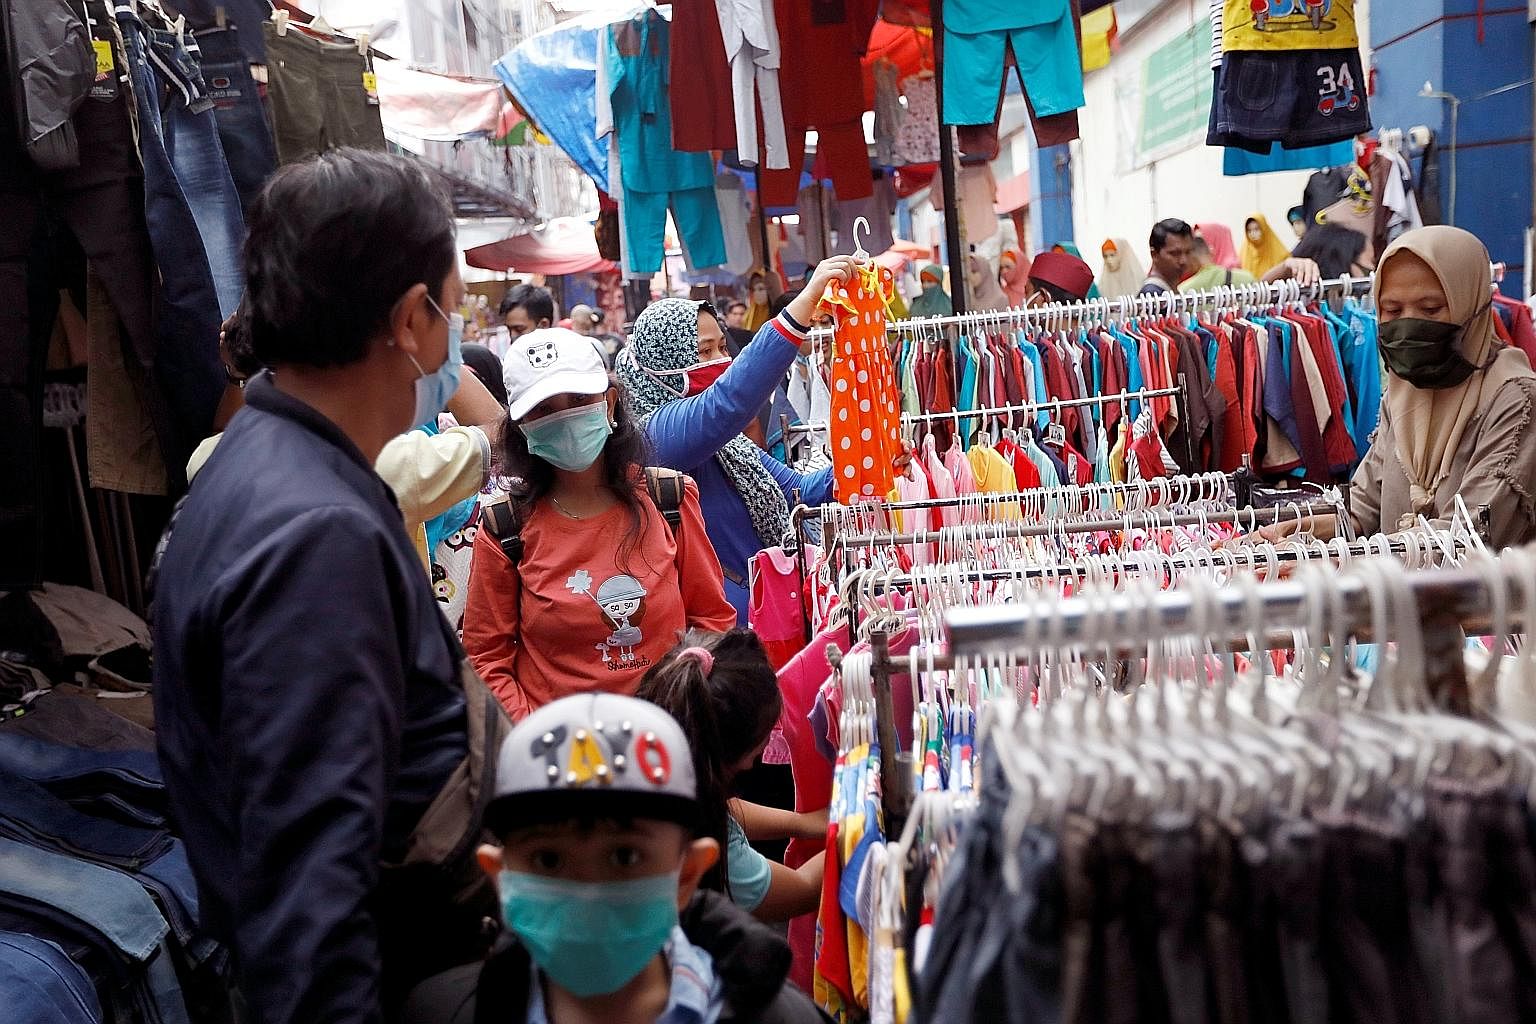 Tanah Abang market (above) in central Jakarta is among many that have been teeming with shoppers ahead of Hari Raya Aidilfitri on Sunday.